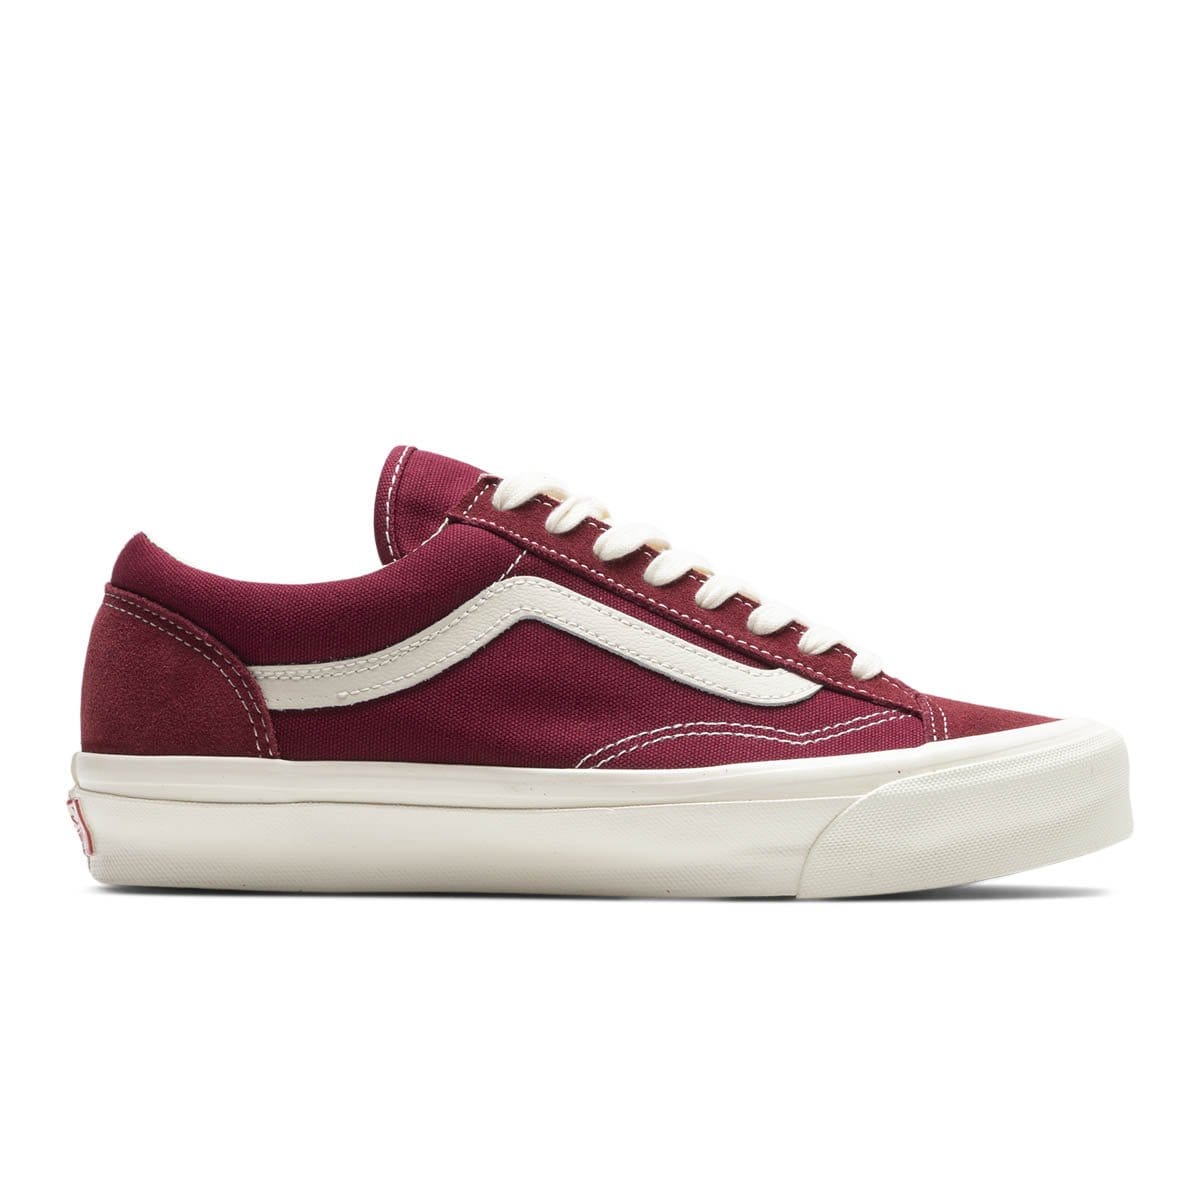 Vault by Vans Casual OG STYLE 36 LX